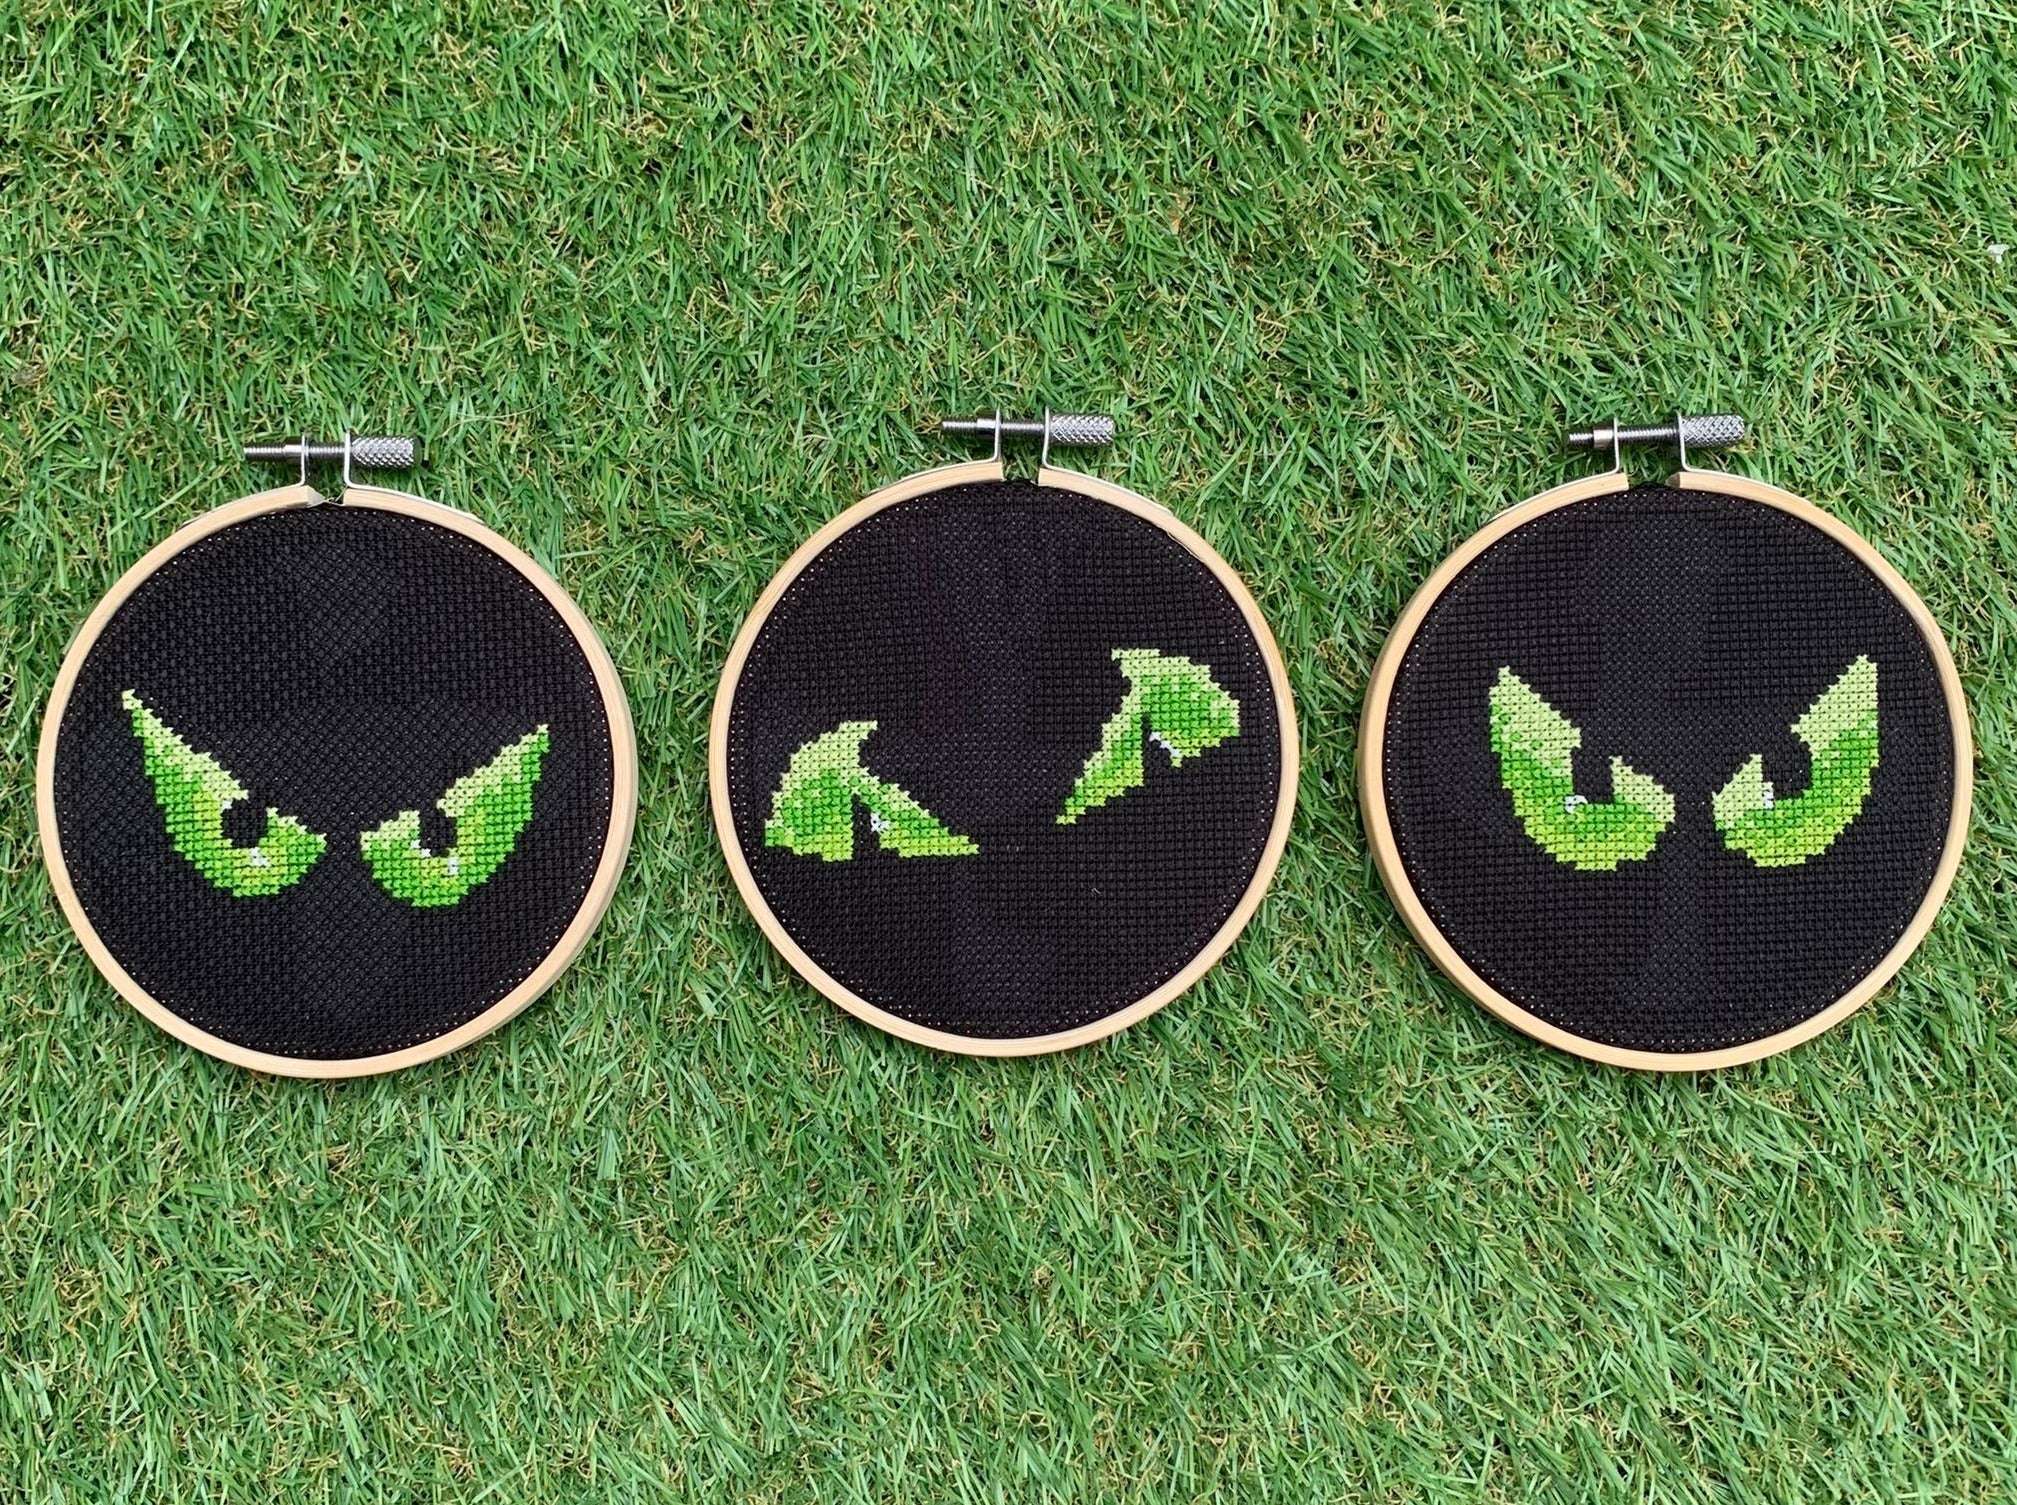 Three pairs of spooky eyes that are cross stitched in bright green onto black fabric